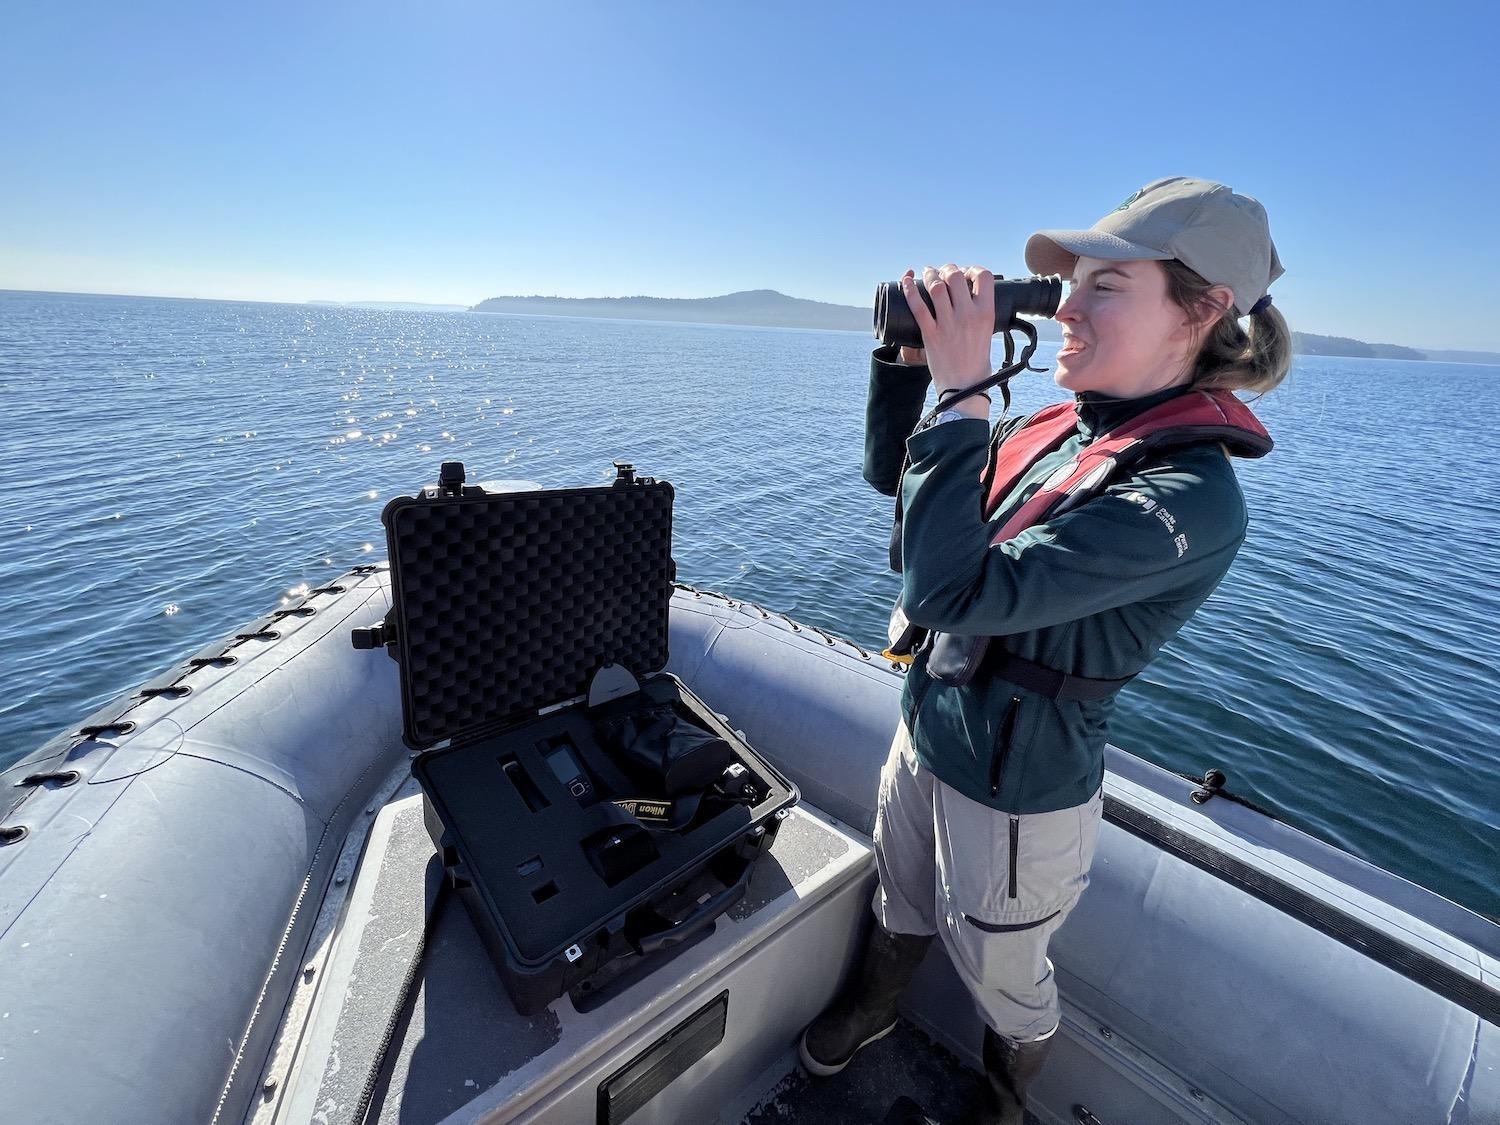 When Kirsten Mathison is out doing whale research, she relies on binoculars with image stabilizers.